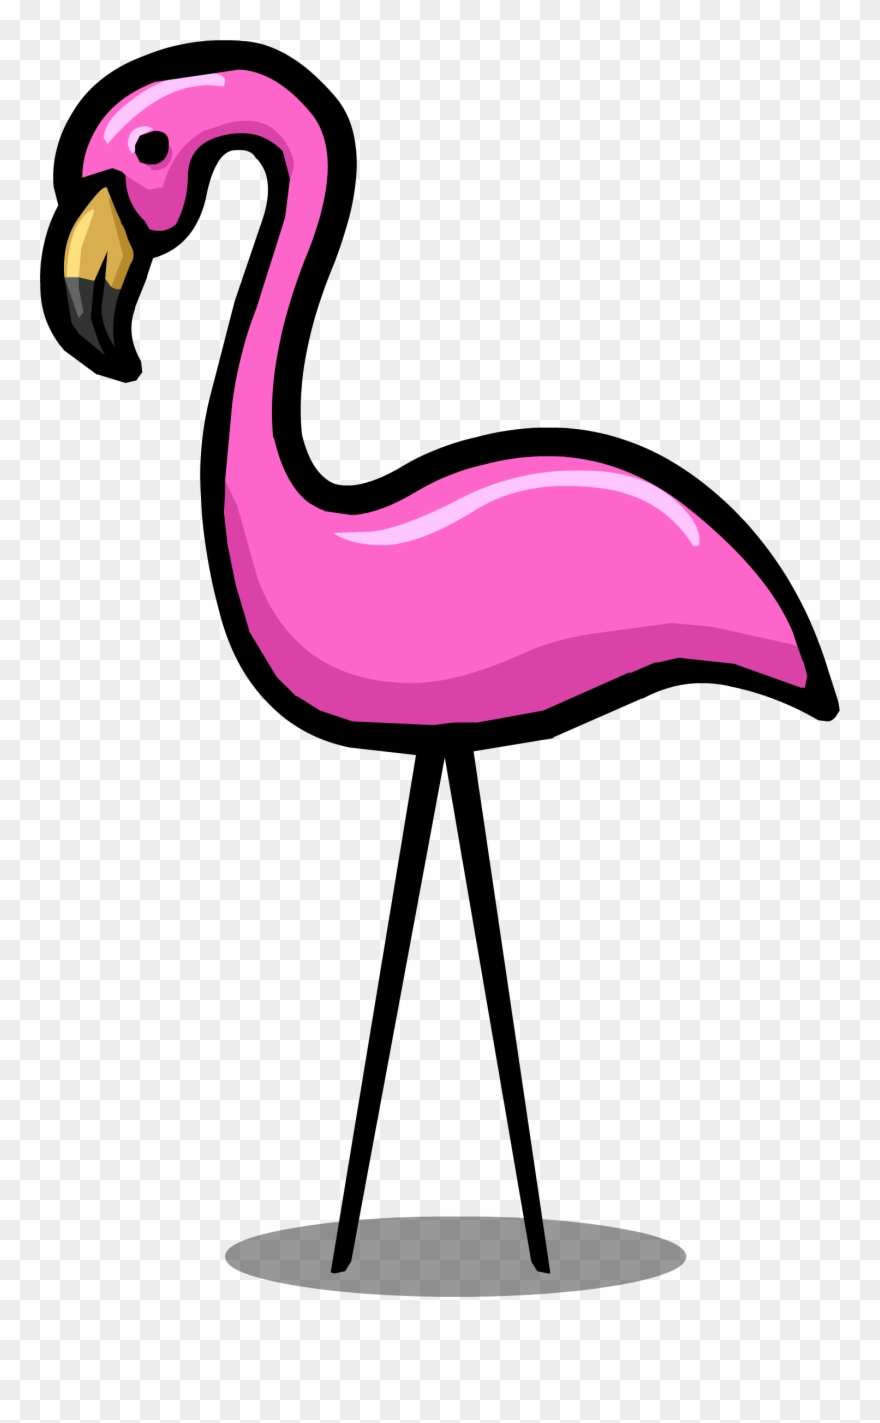 Download clipart pink flamingo 10 free Cliparts | Download images ...